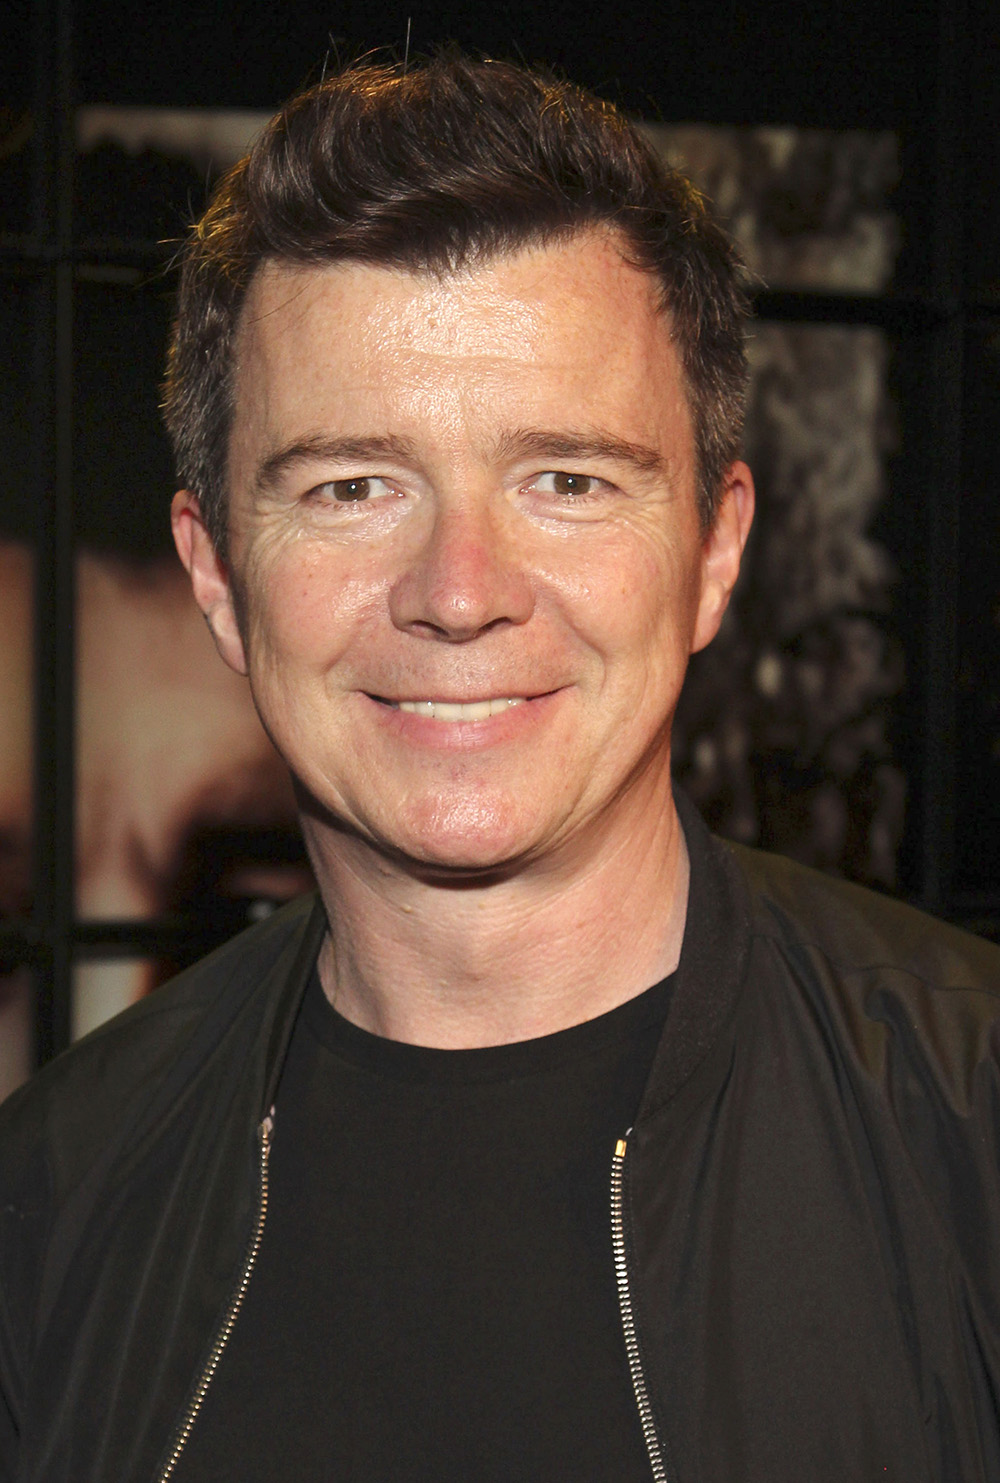 Rick Astley never gave us up - and tops the British charts once again: View...